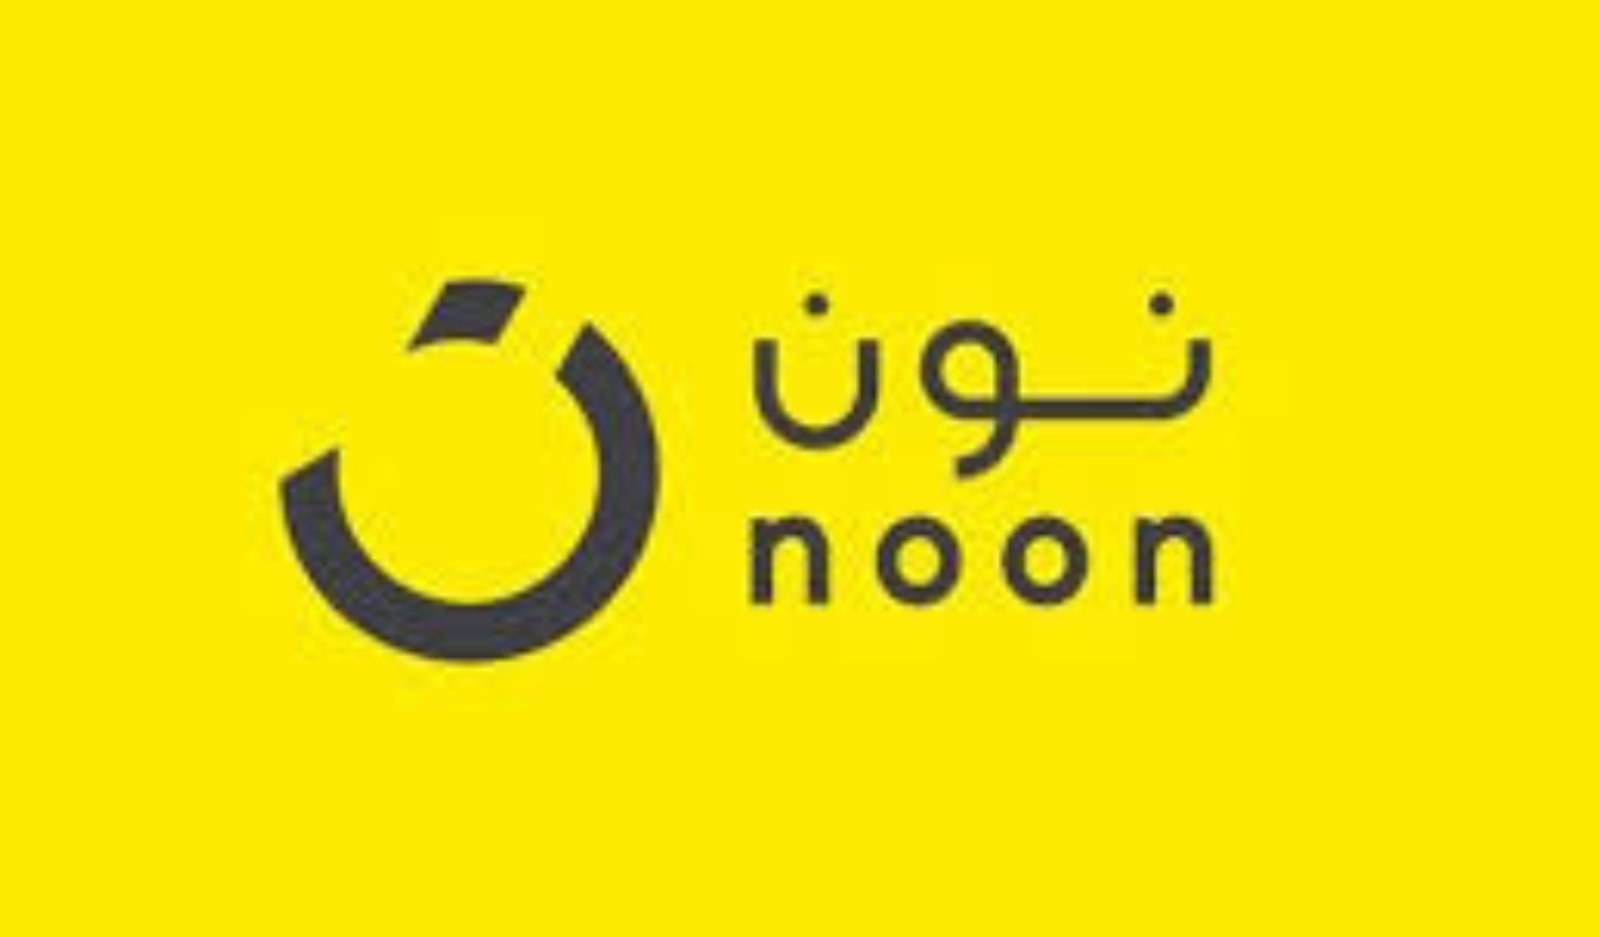 Noon Acquires Leading Online Fashion Retailer Namshi